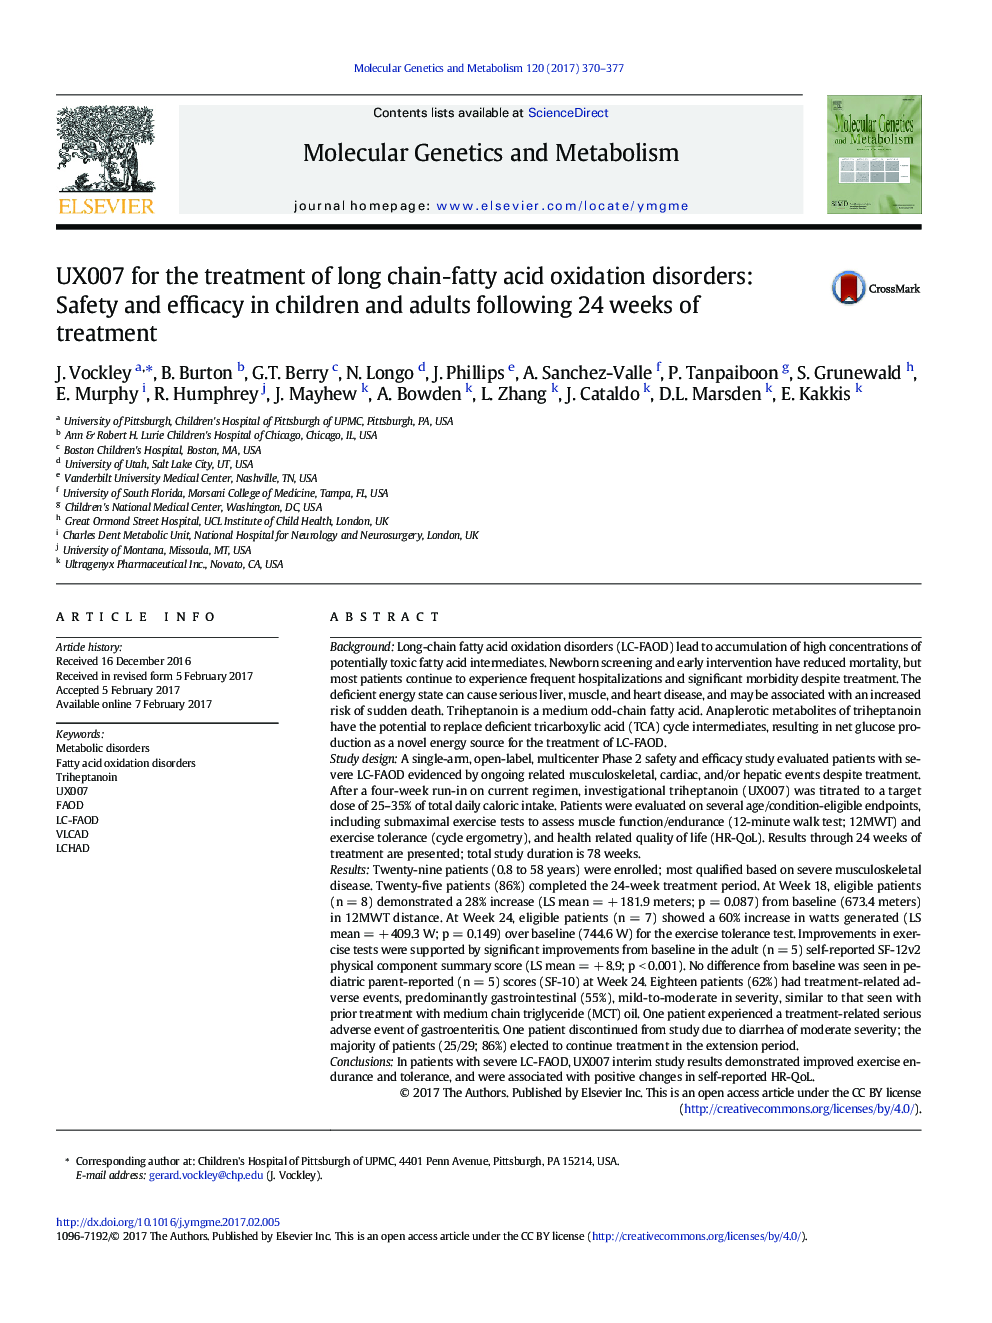 UX007 for the treatment of long chain-fatty acid oxidation disorders: Safety and efficacy in children and adults following 24 weeks of treatment